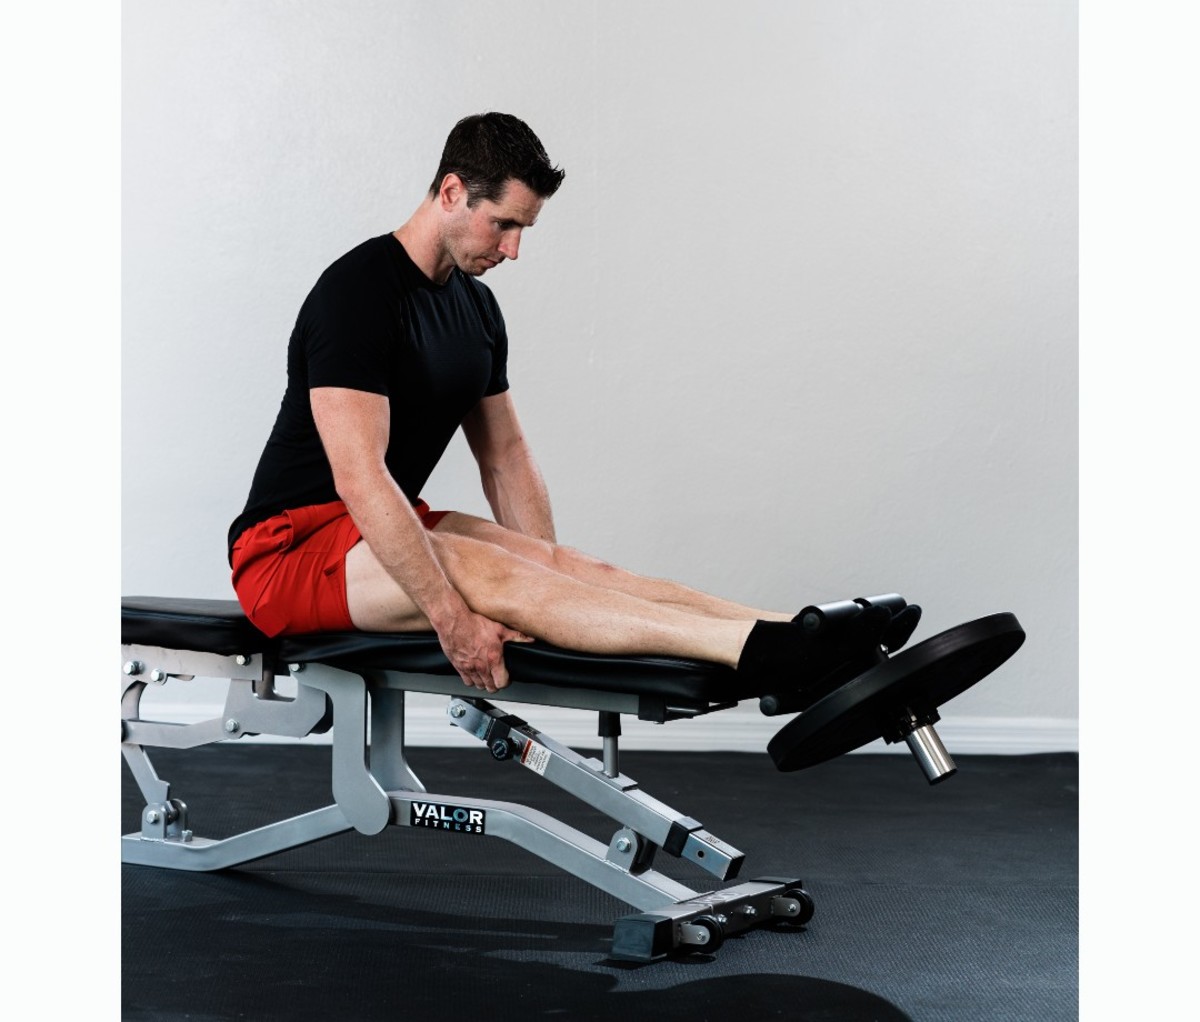 Caucasian man in black t-shirt and red shorts doing tibialis raise on bench